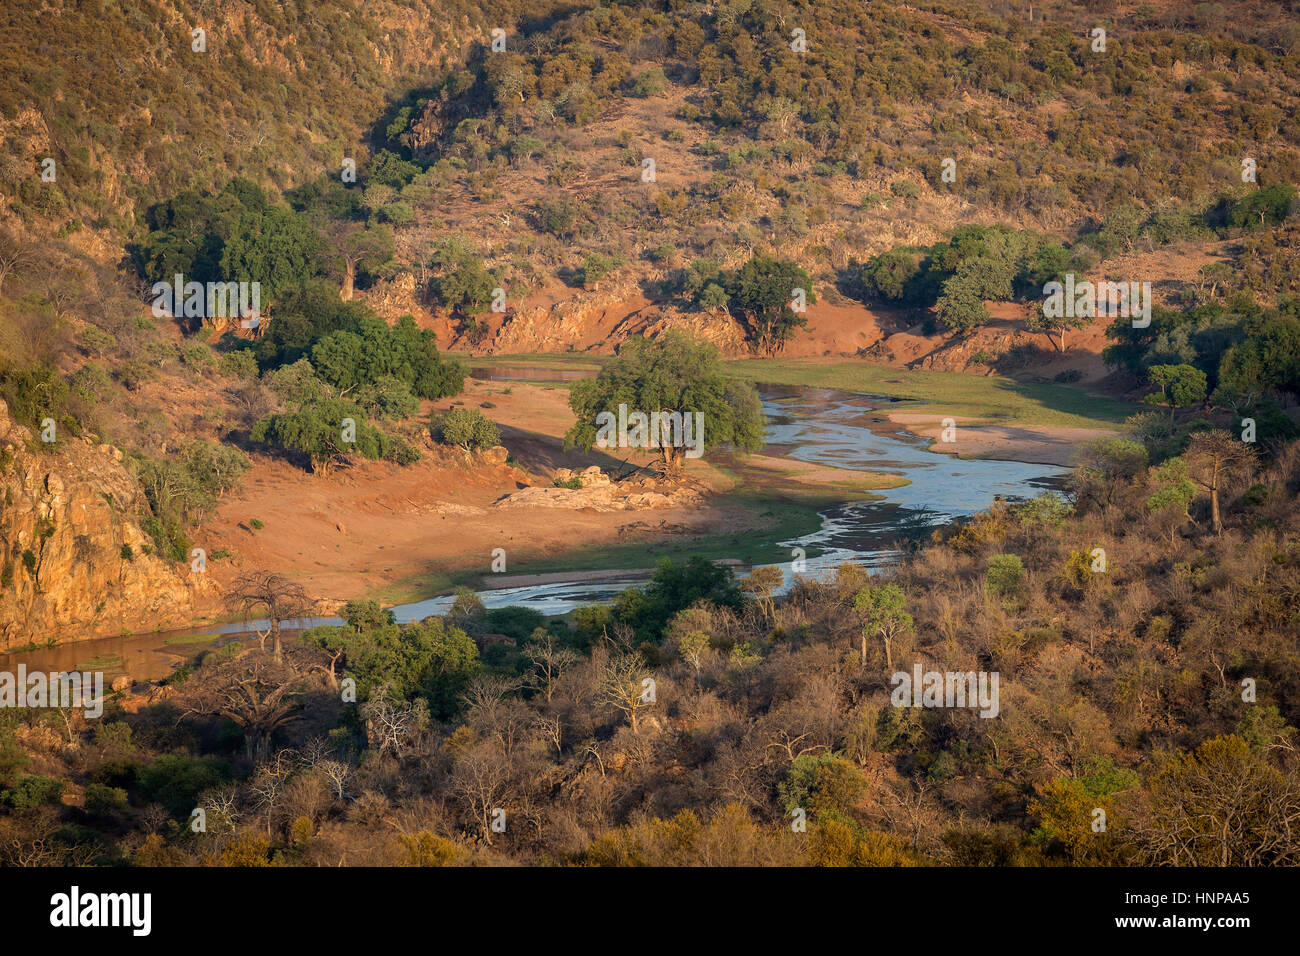 Luvuvhu River, Kruger National Park, South Africa Stock Photo